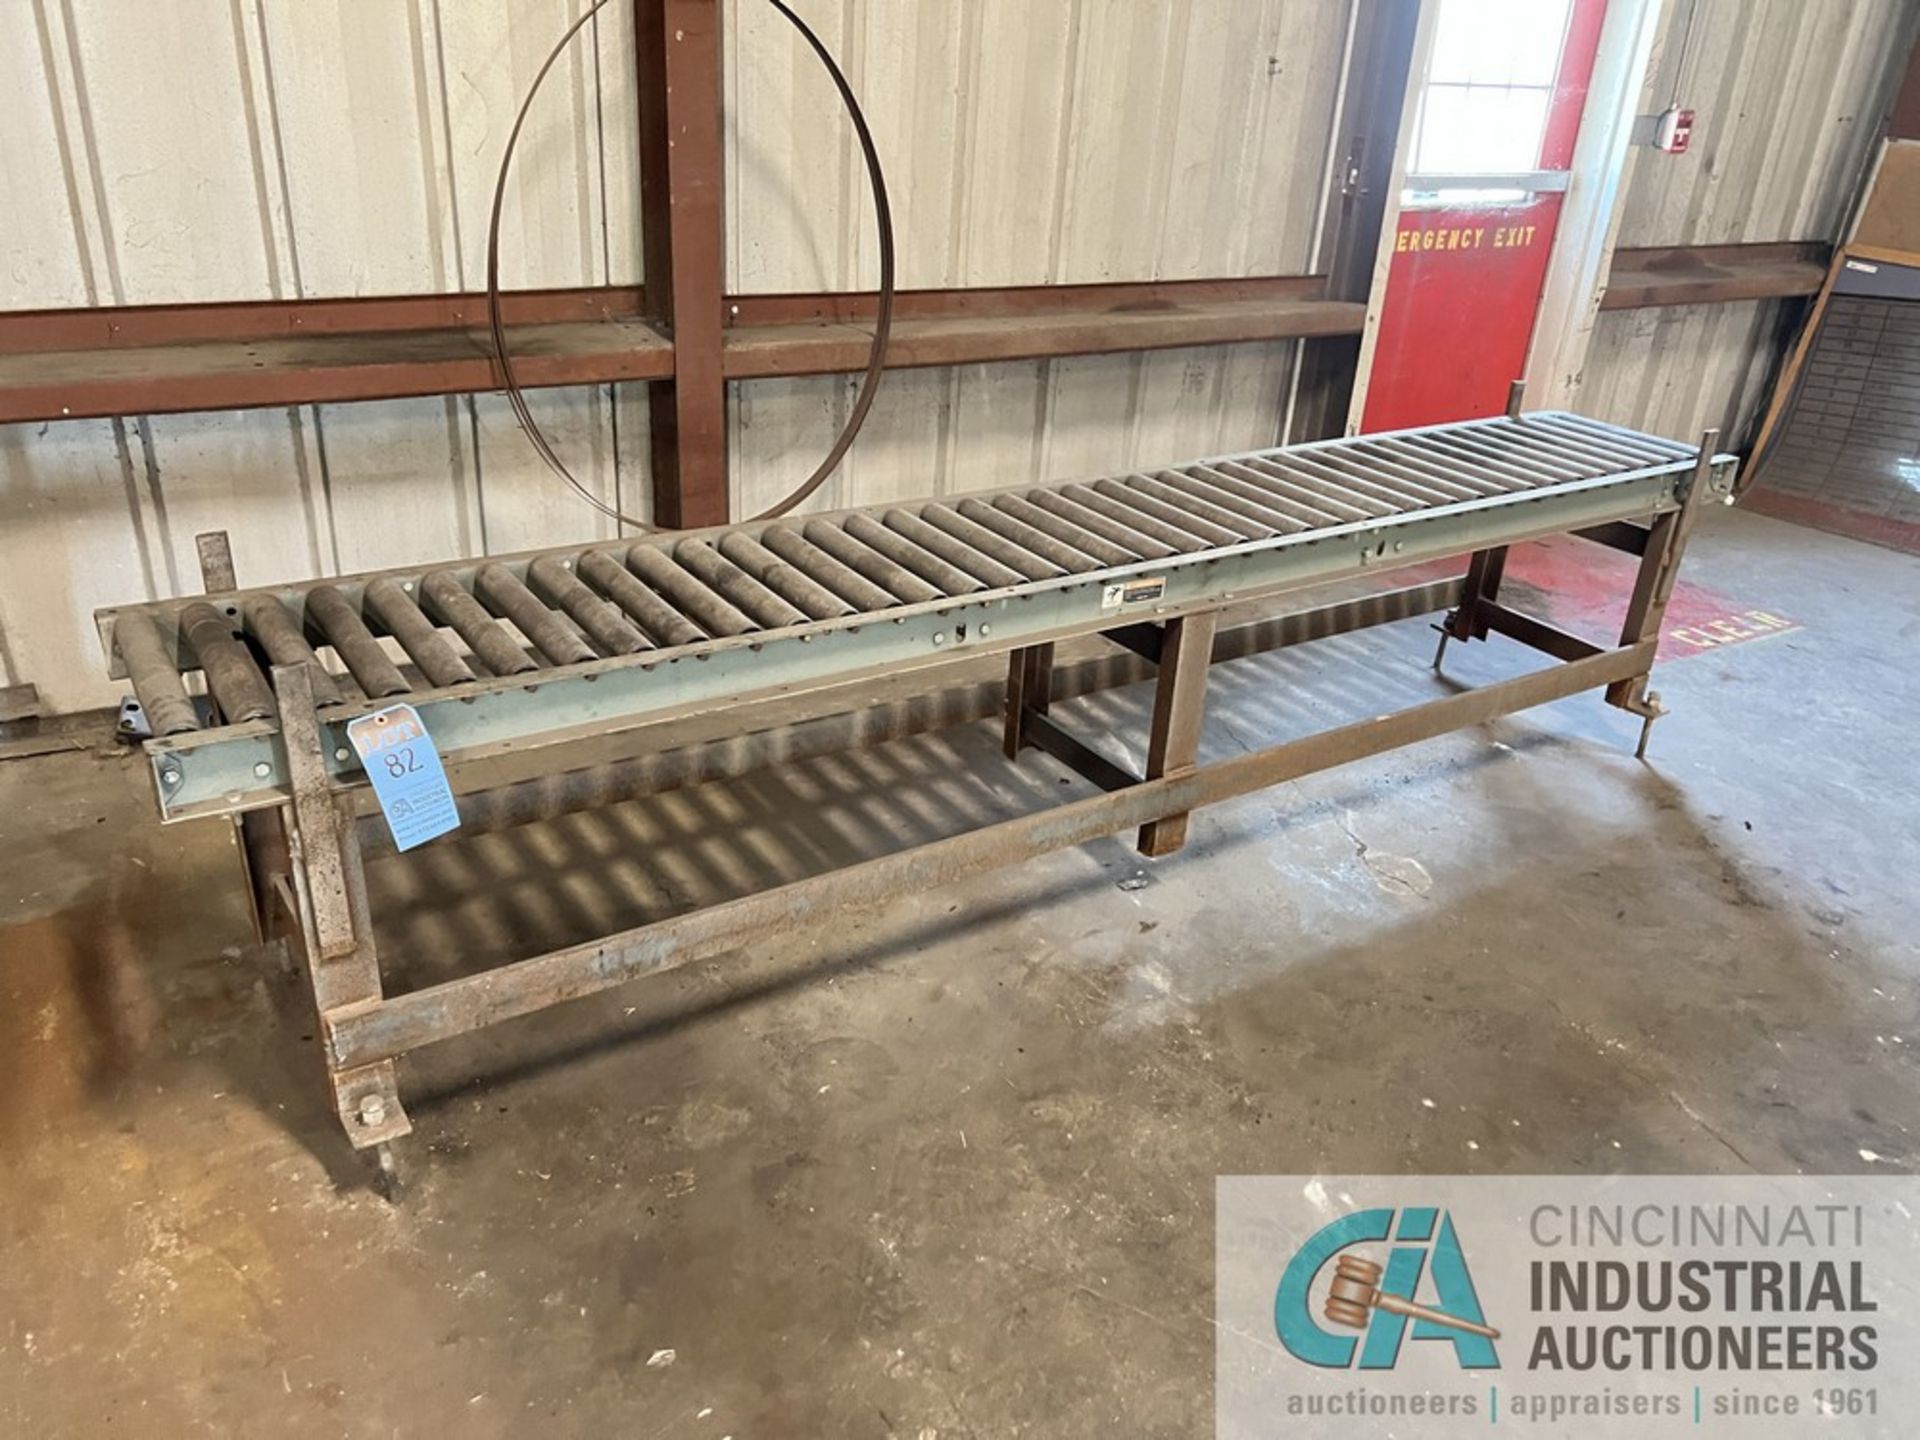 SECTIONS 10' X 15" WIDE ROLLERS X 27" HIGH GRAVITY FEED ROLLER CONVEYOR